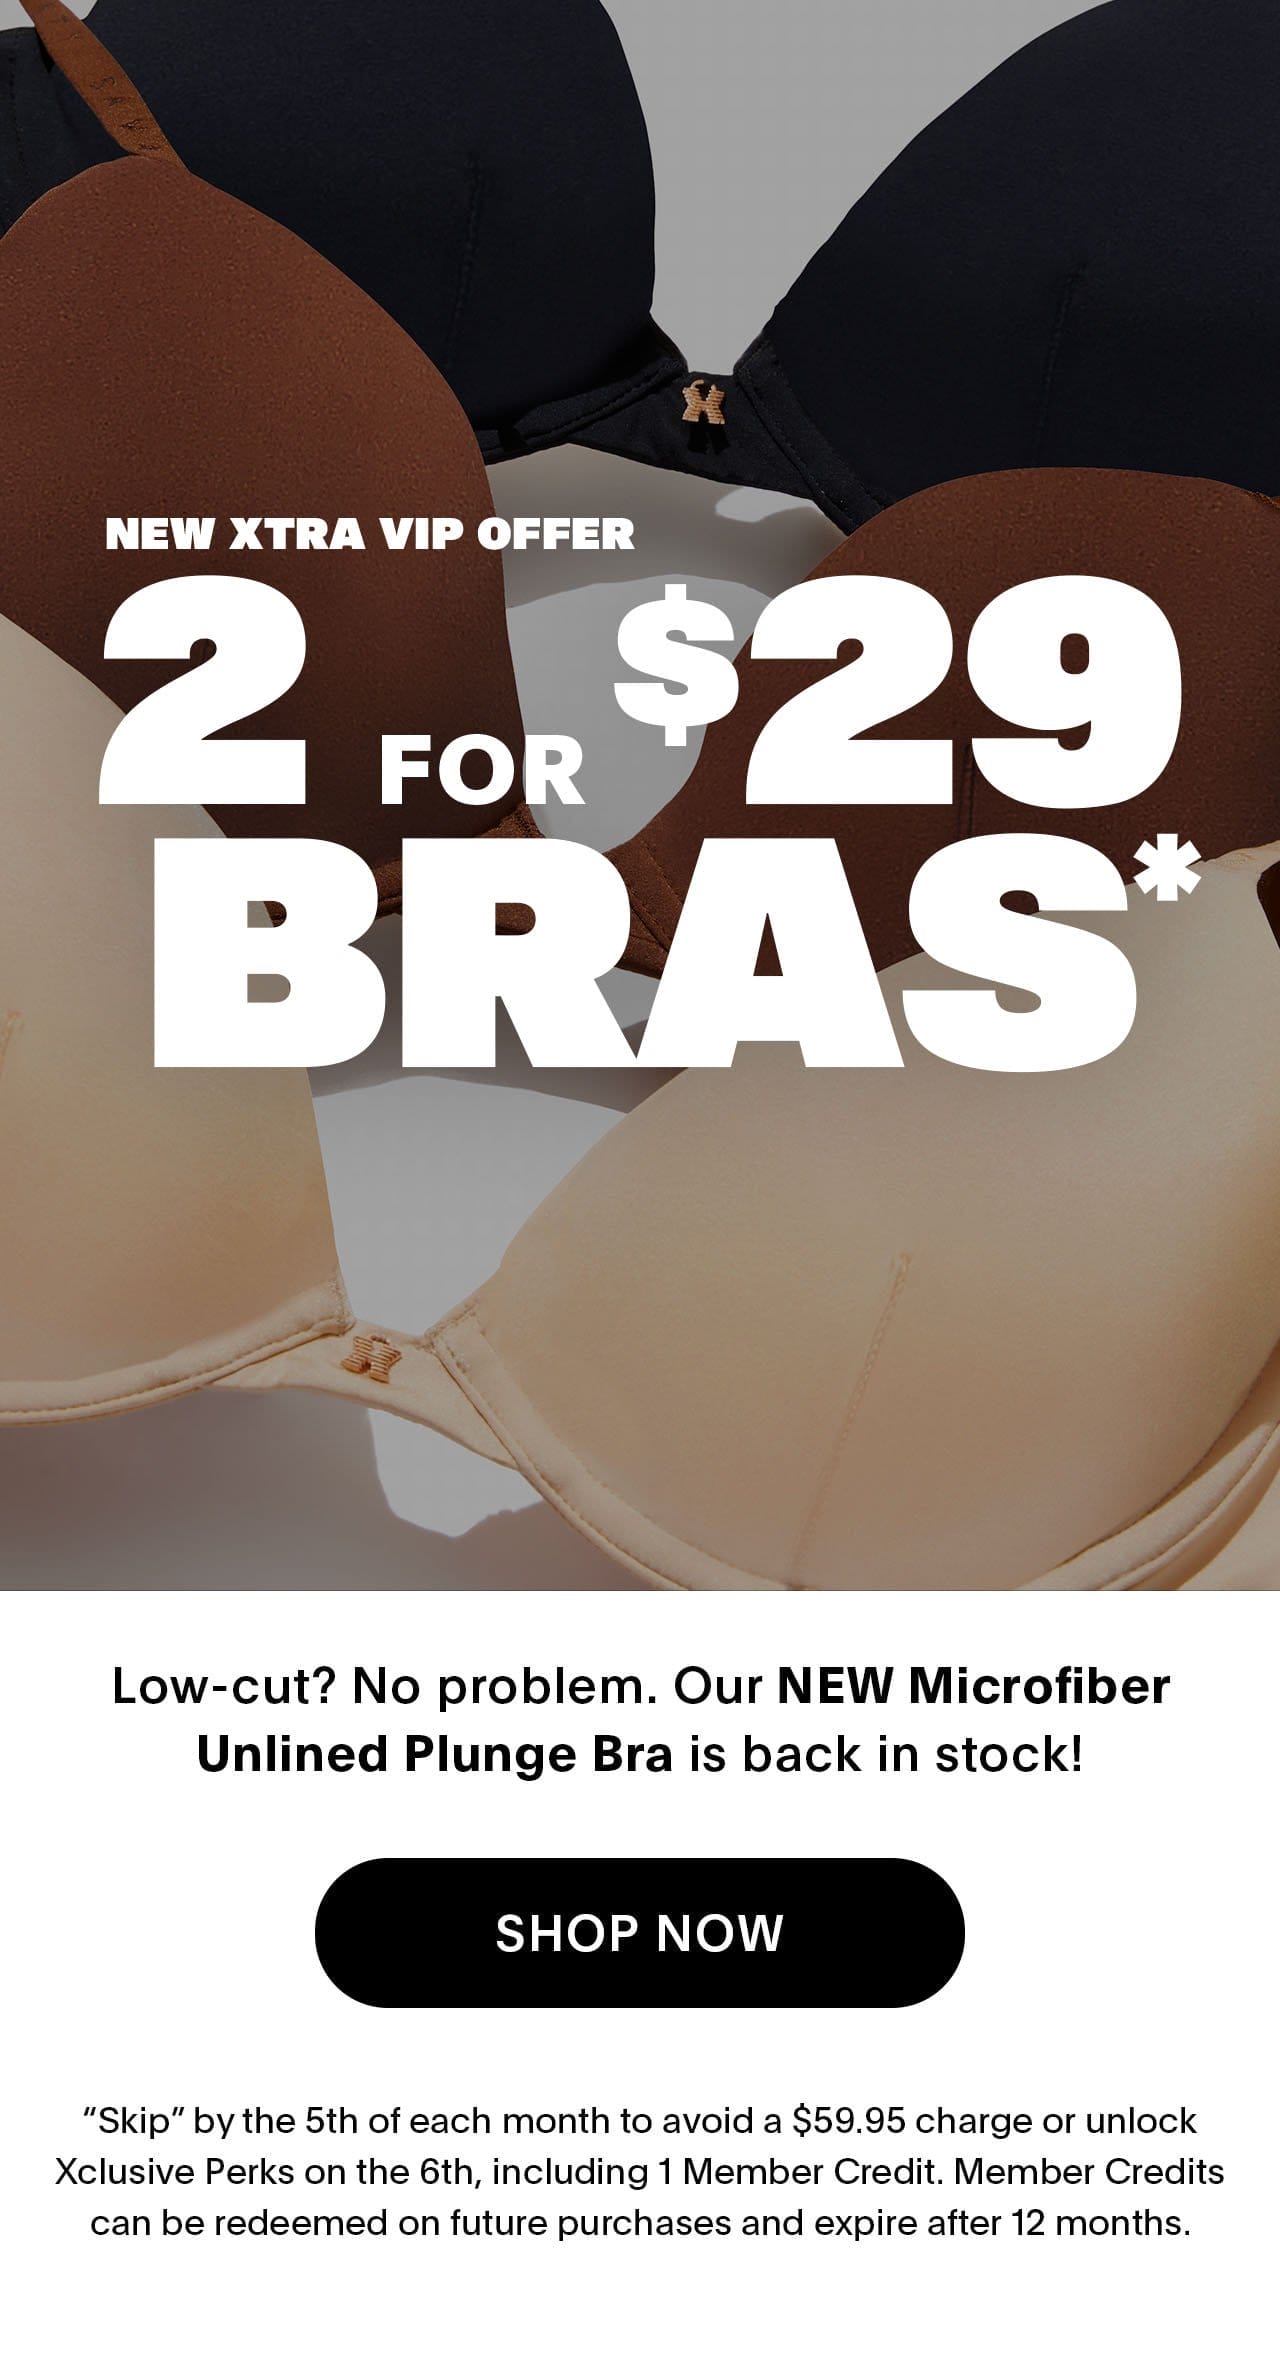 New Xtra VIP Offer 2 for \\$29 Bras* 